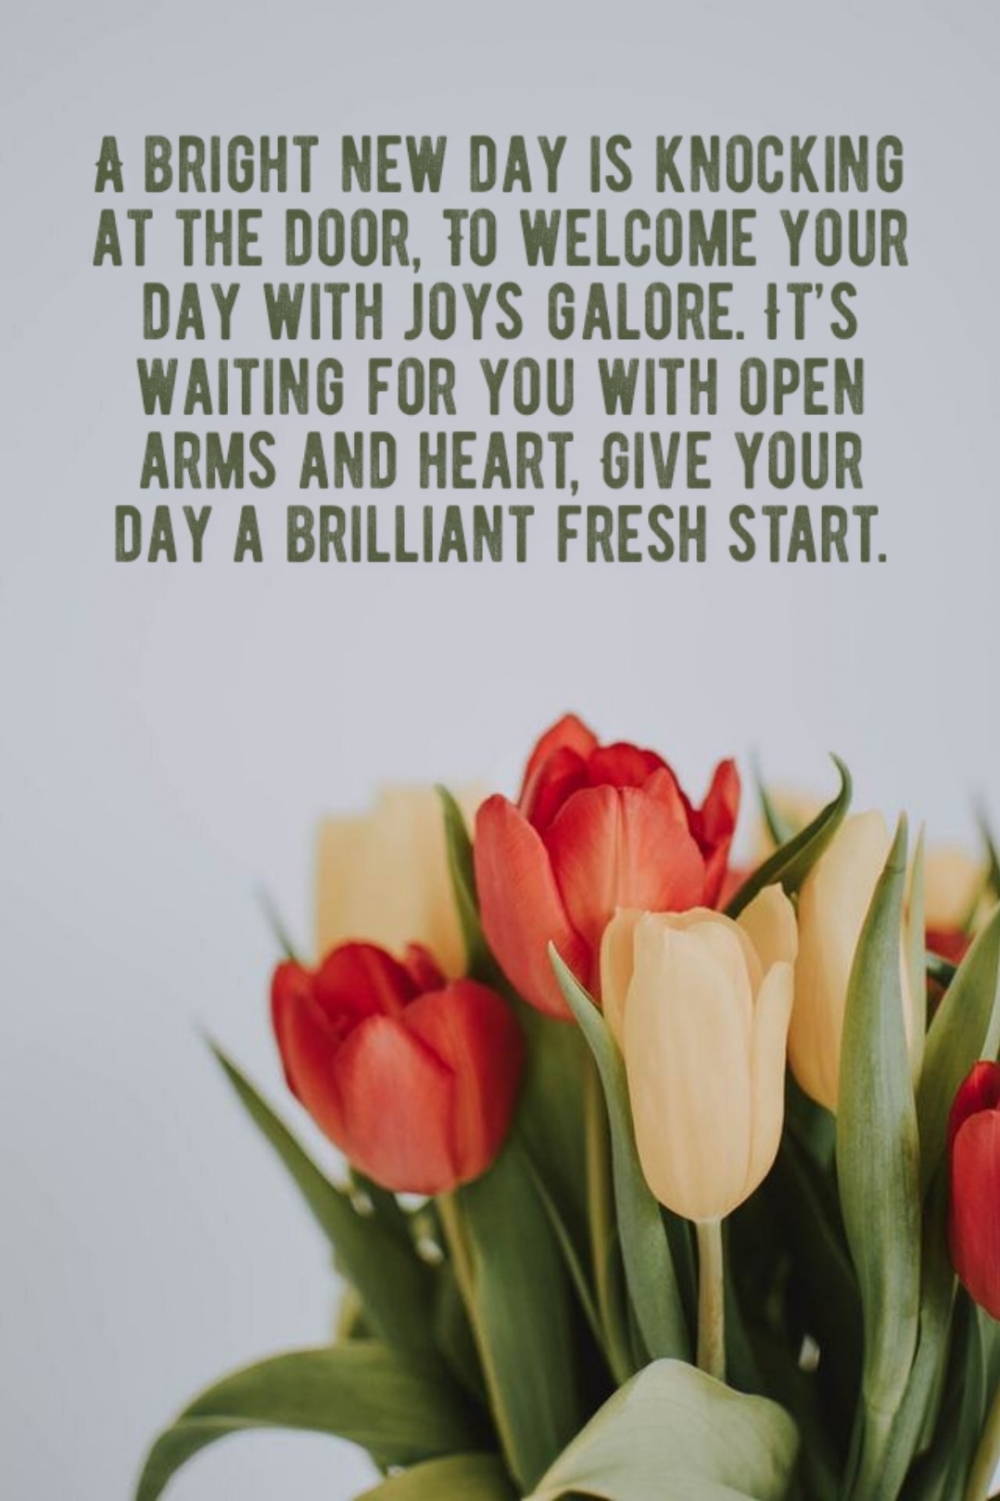 To welcome your day with joys galore.